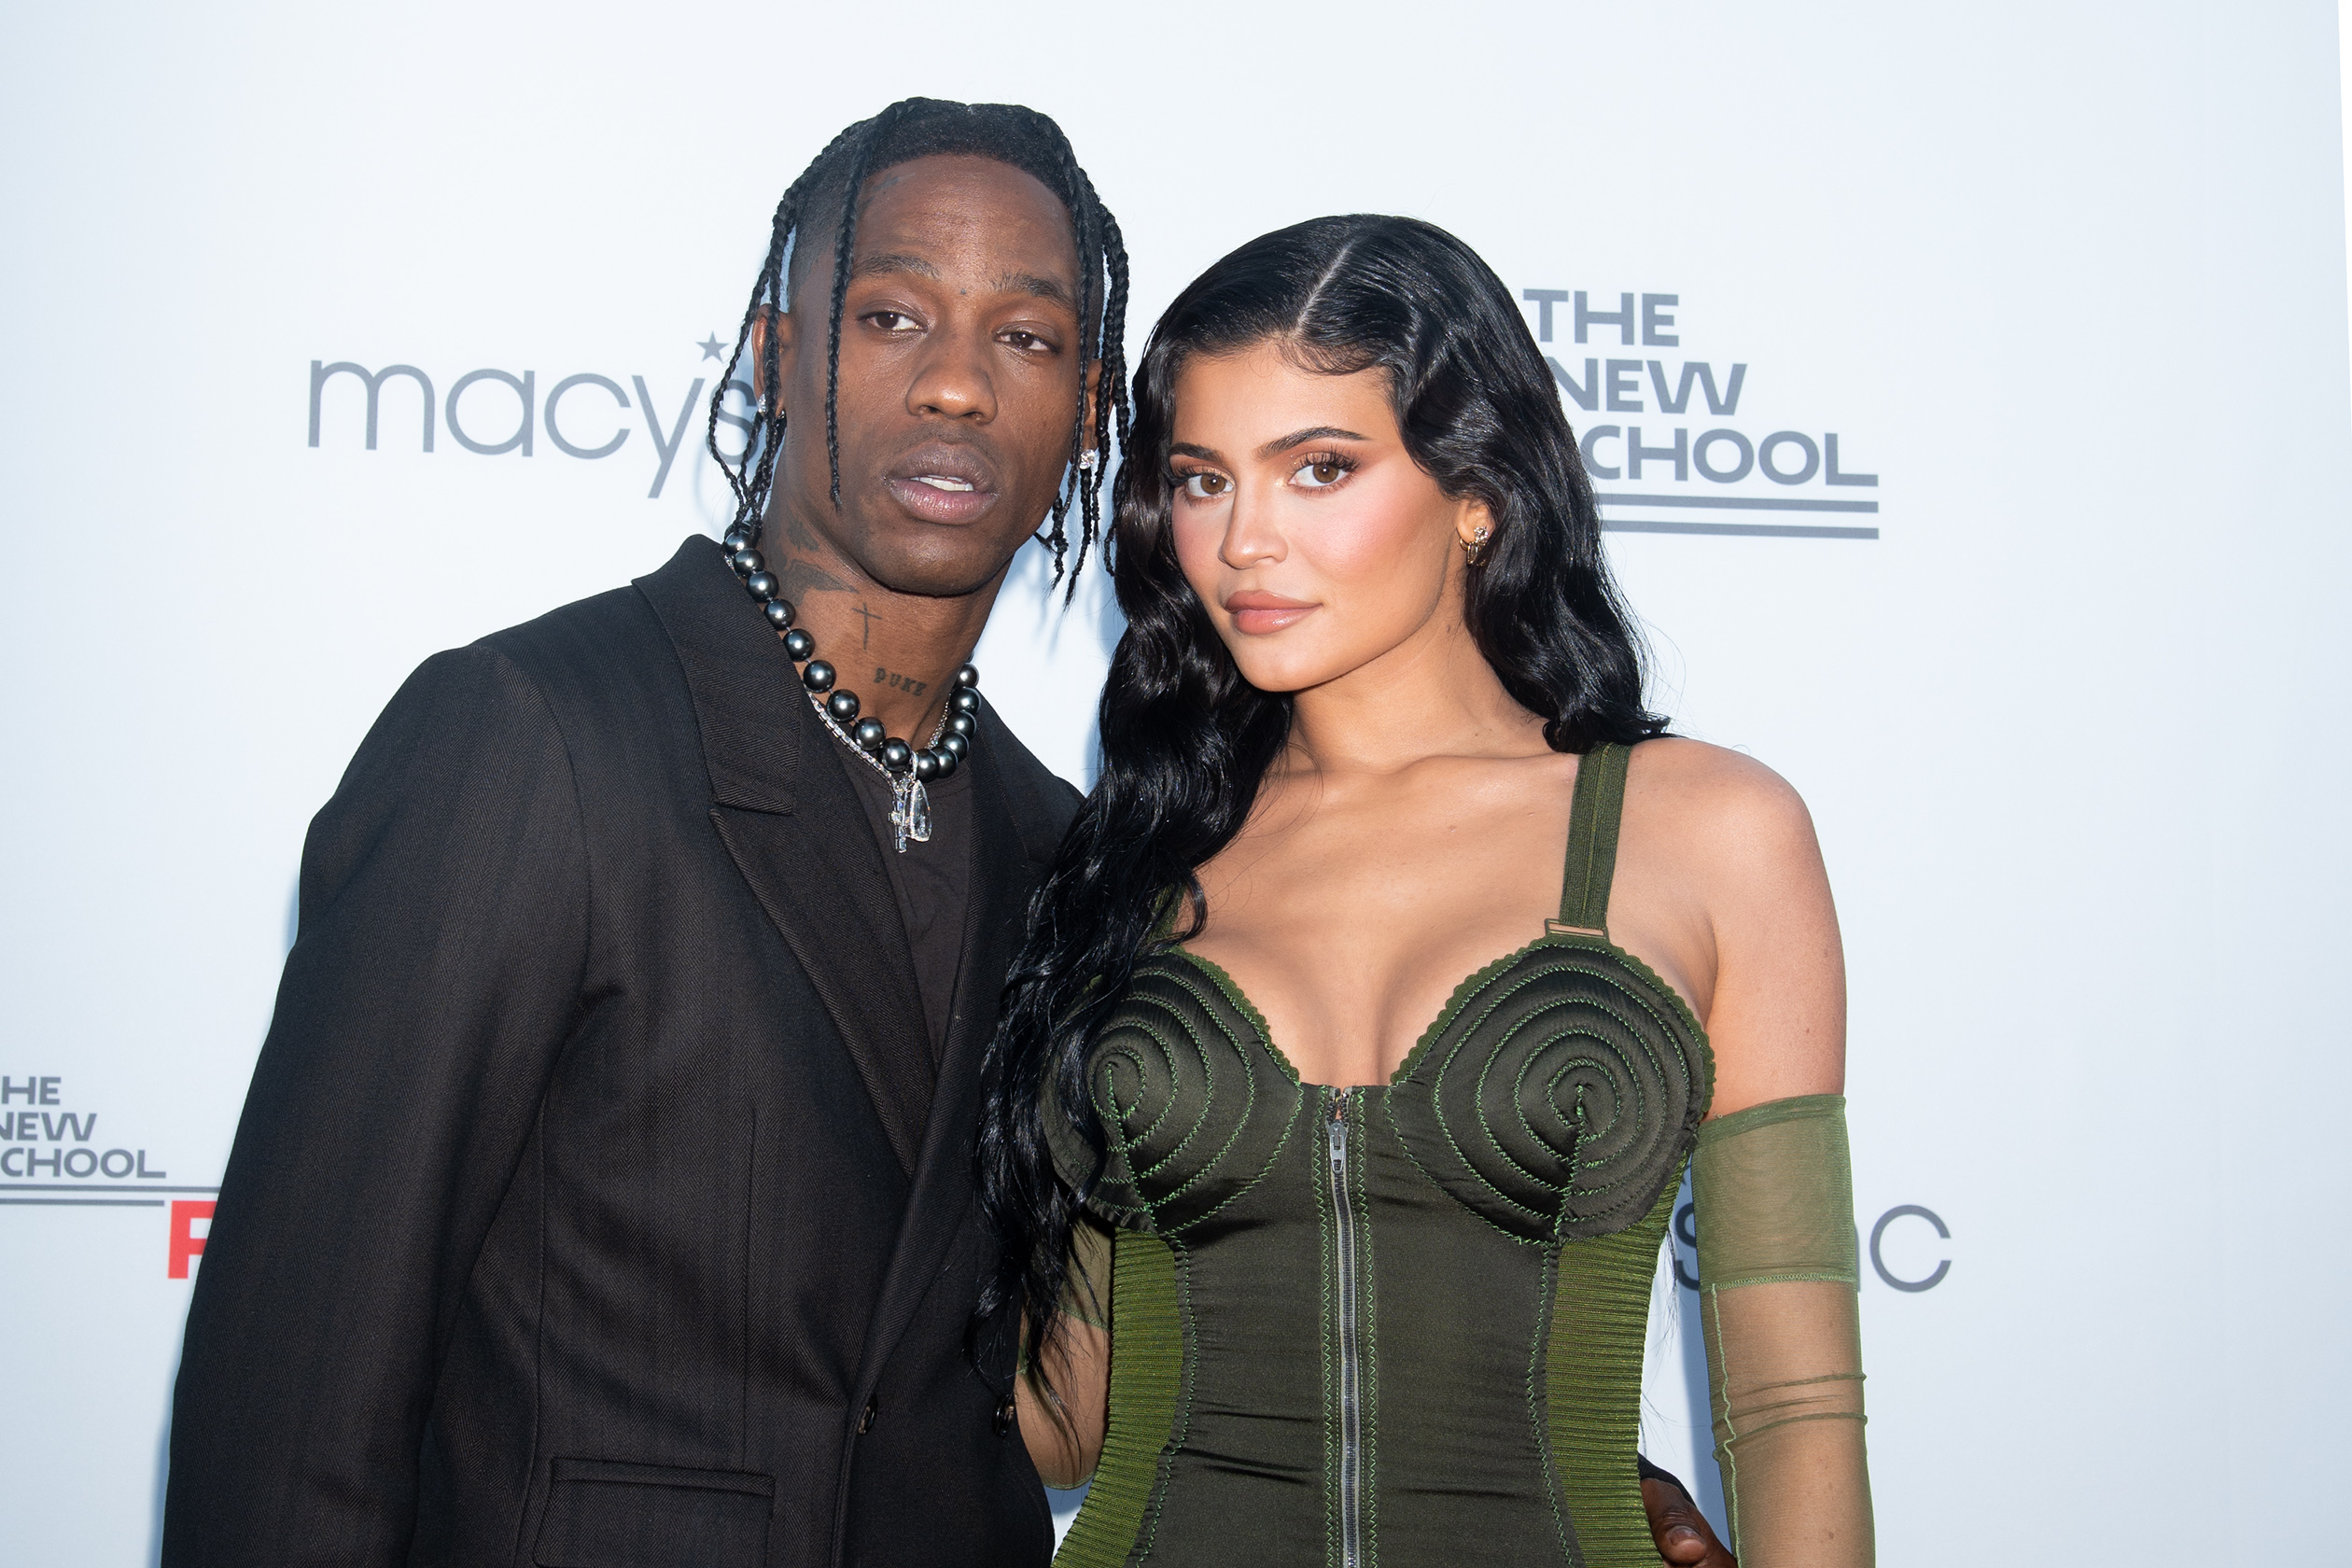 Kylie Jenner Poses in Ex Travis Scott's Newly Released Sneakers